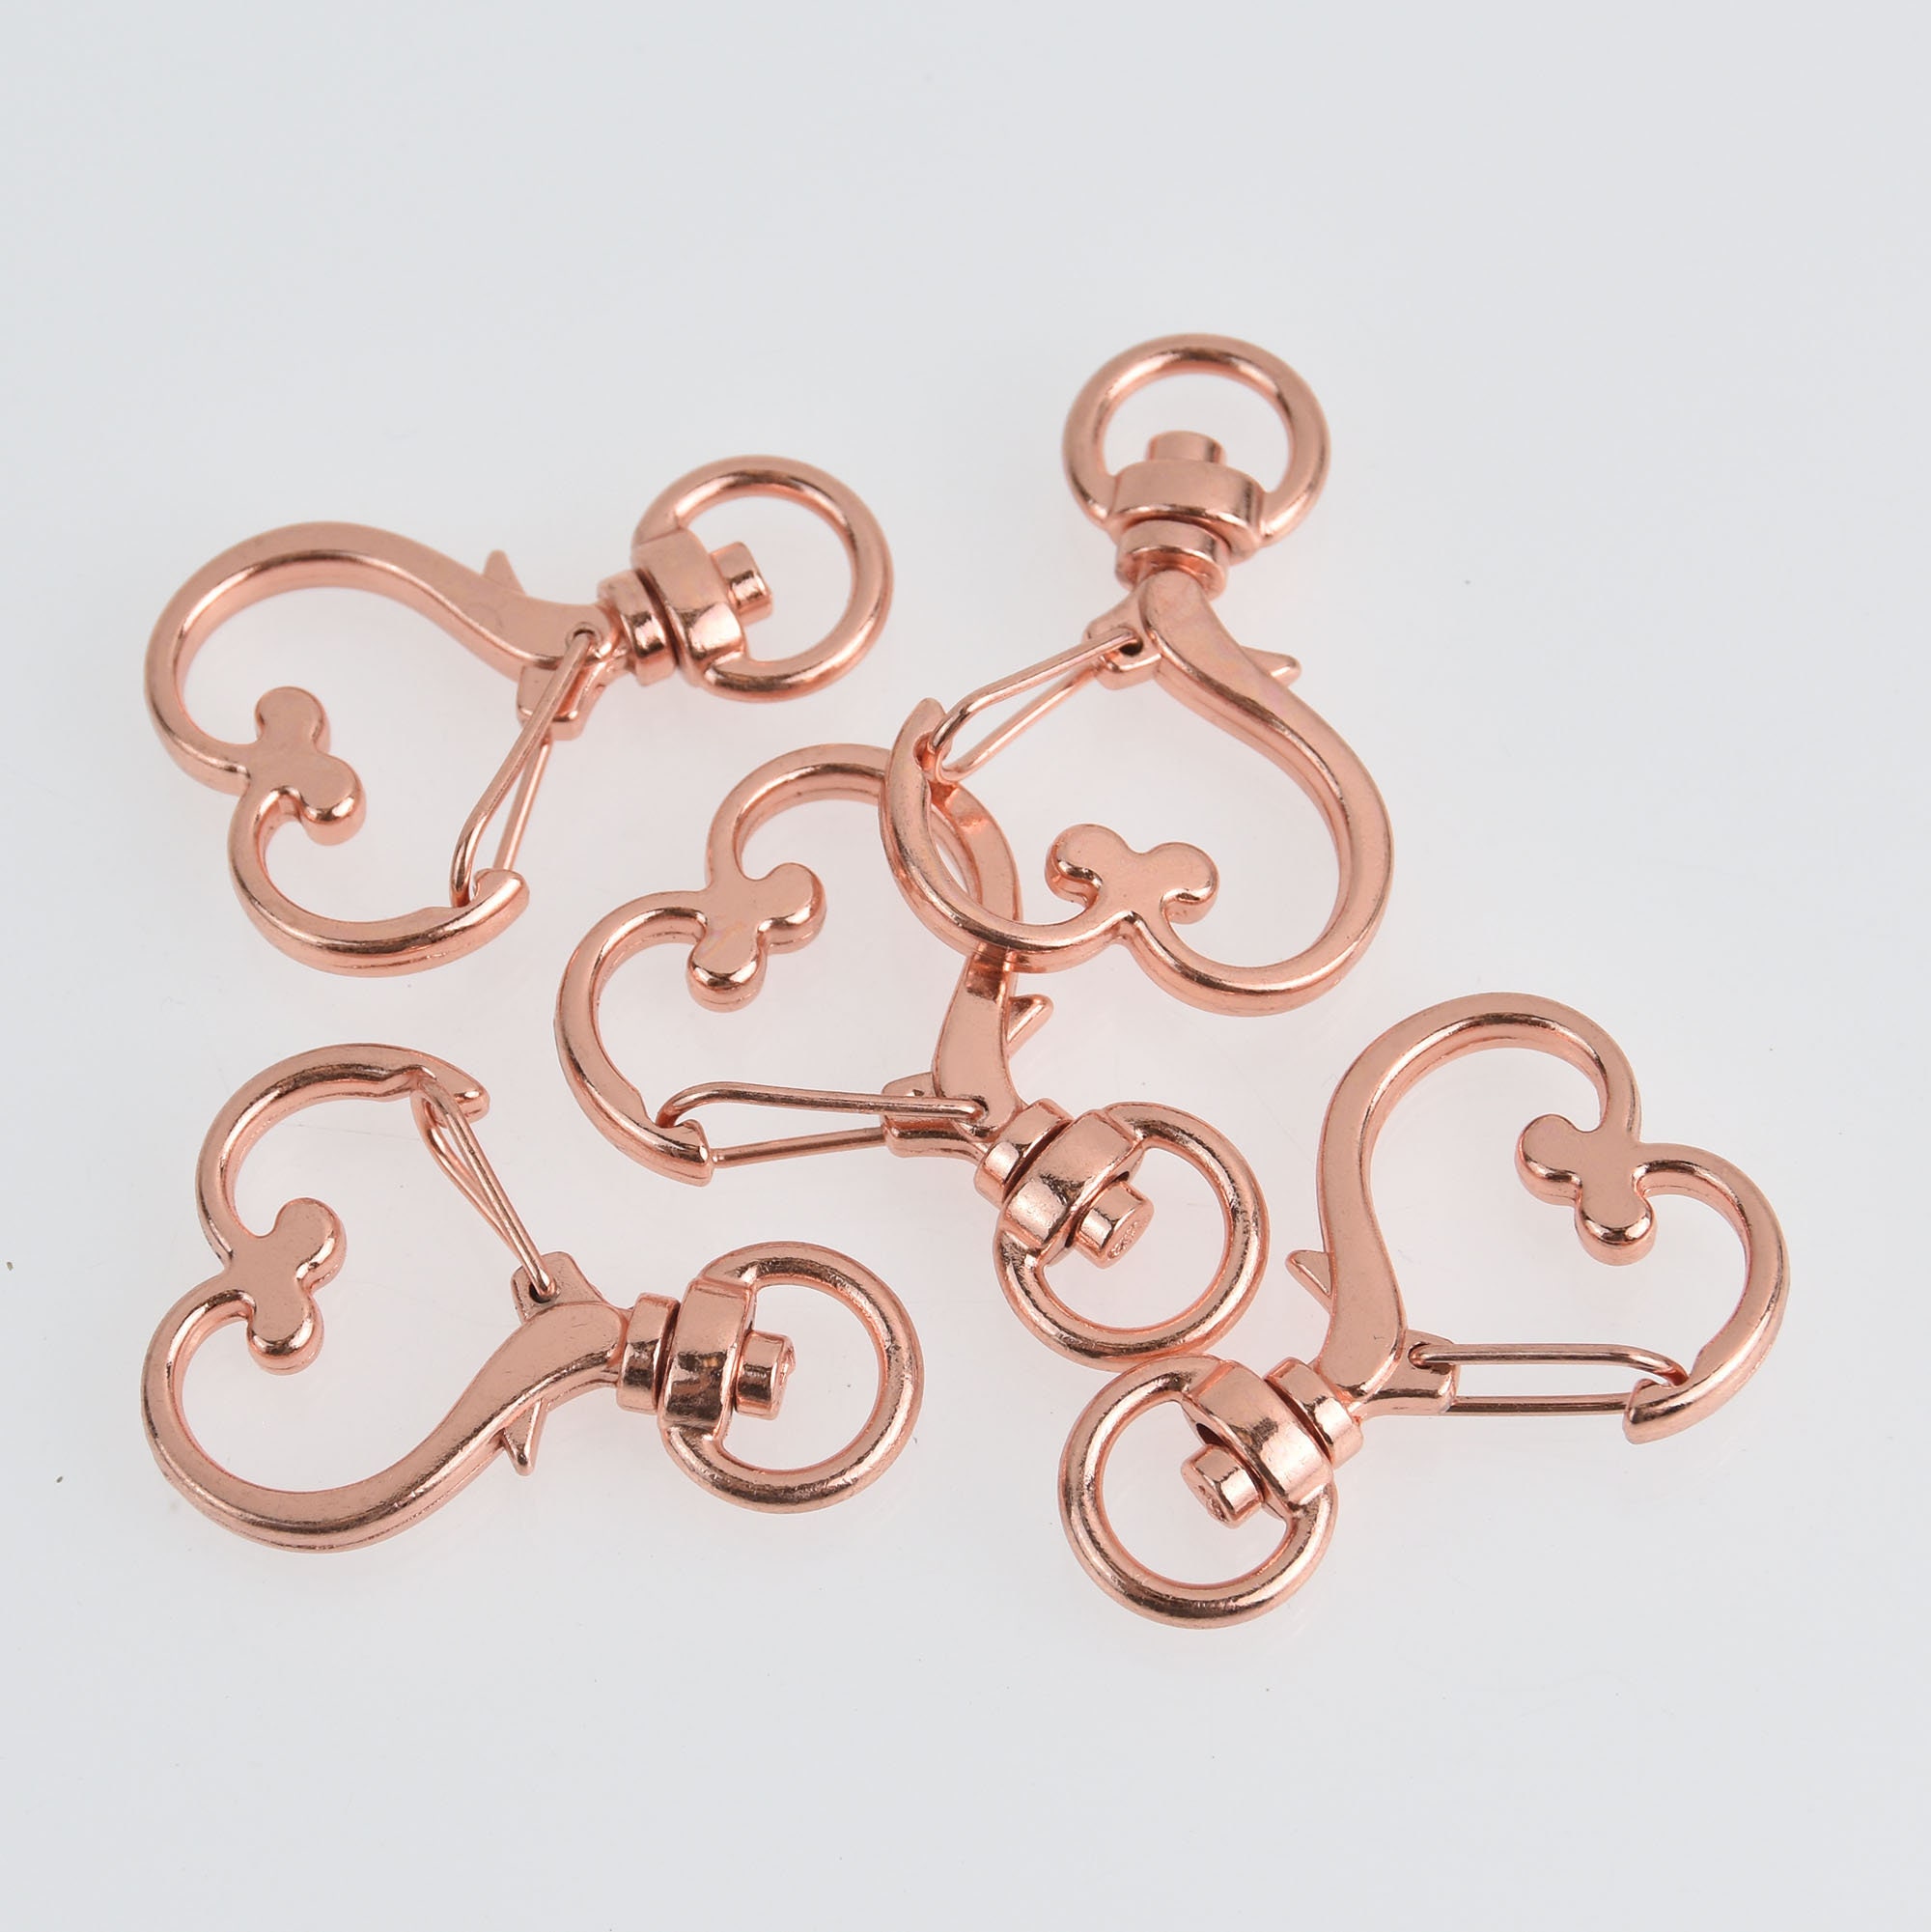 5 Rose Gold Key Chains With Heart Clasp, Swivel Lobster Key Chain Clasp  Fin1070 